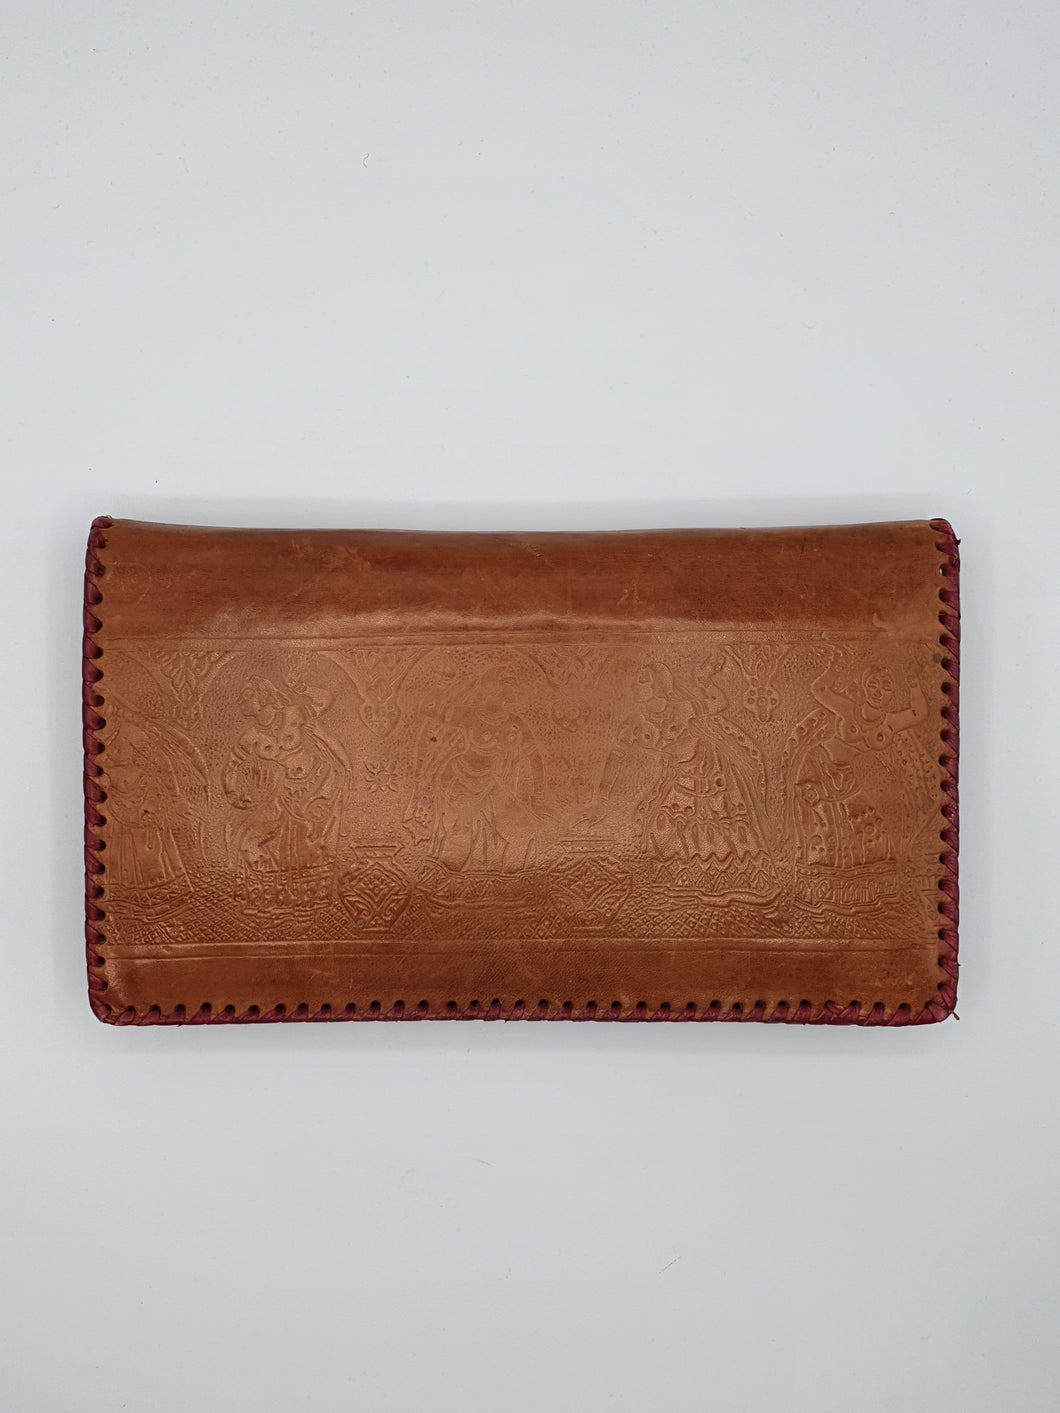 1930s Tan and Red Egyptian Tourist Clutch Bag